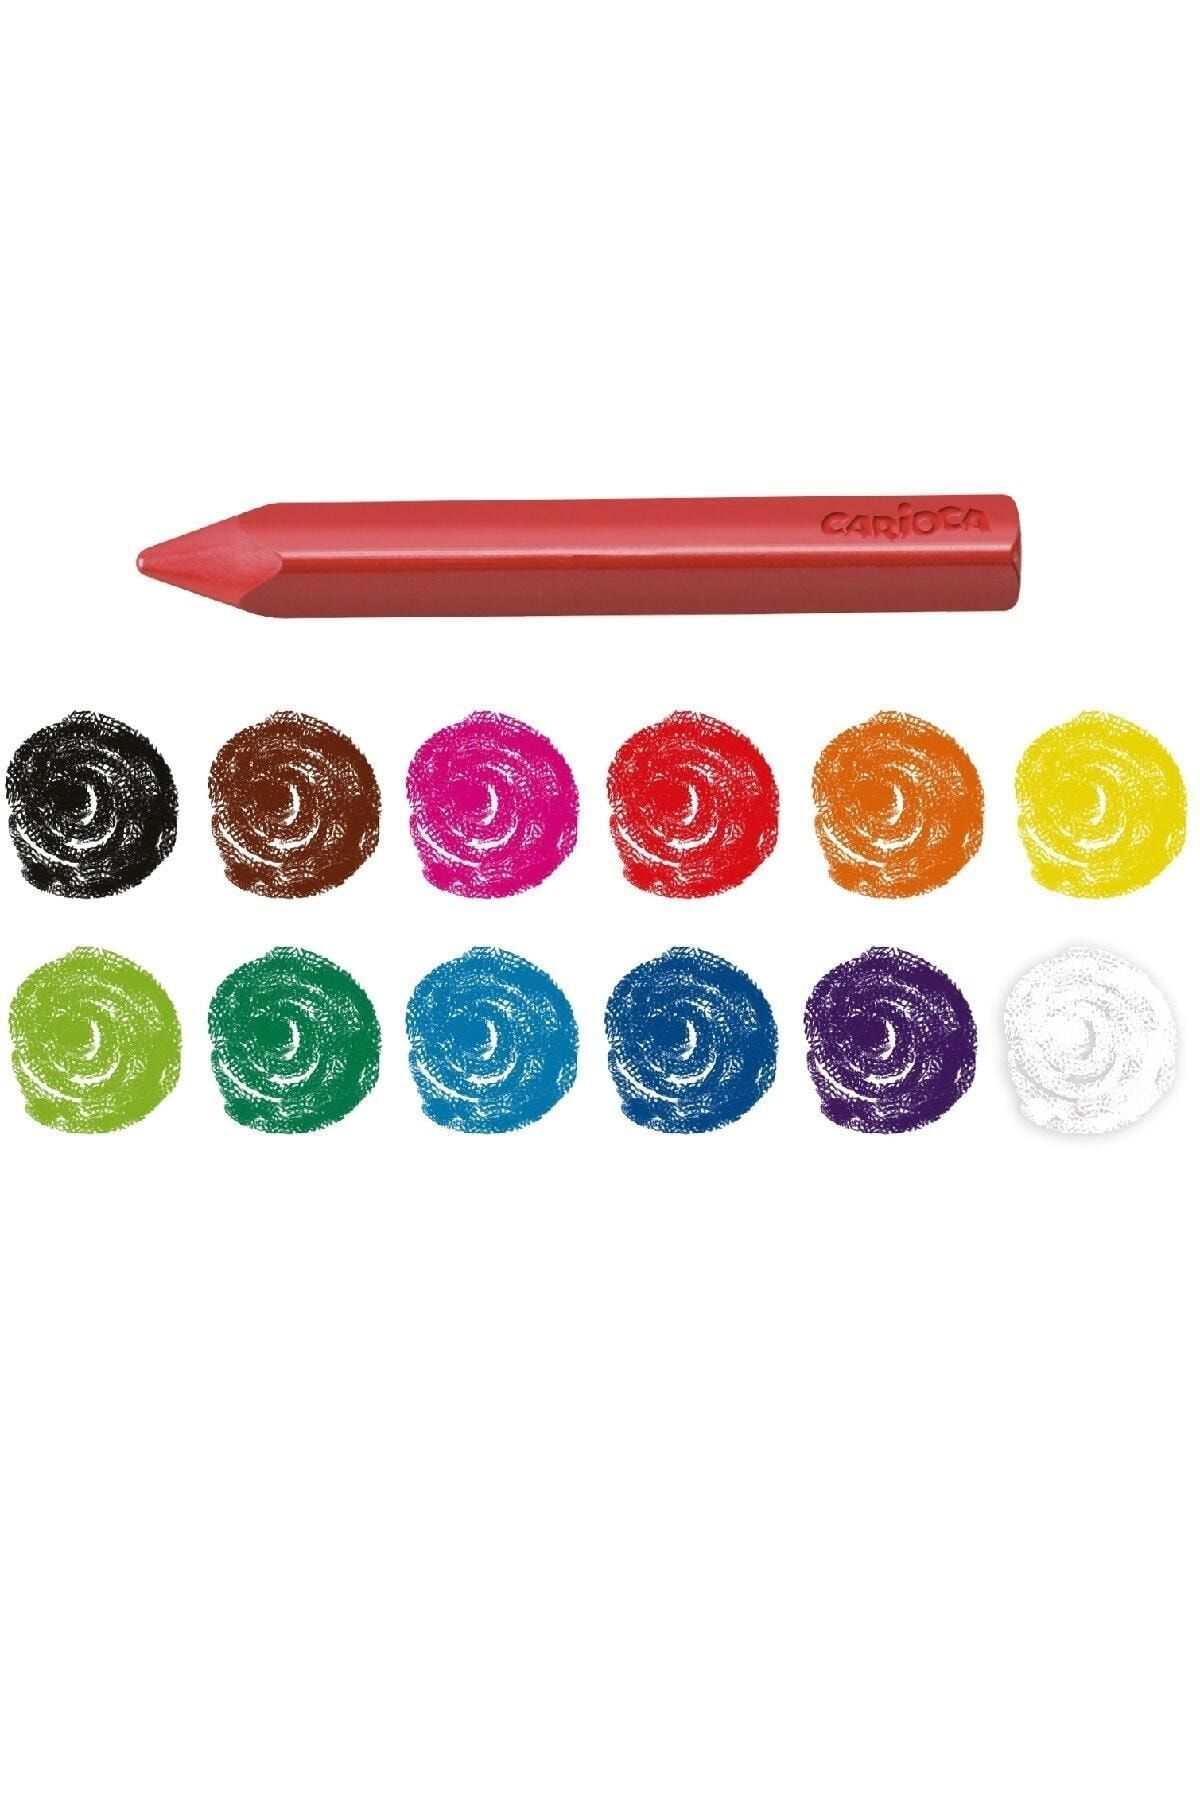 Carioca Jumbo Baby Pastel Crayons That Do Not Contaminate Hands, Pack of 8  - Trendyol